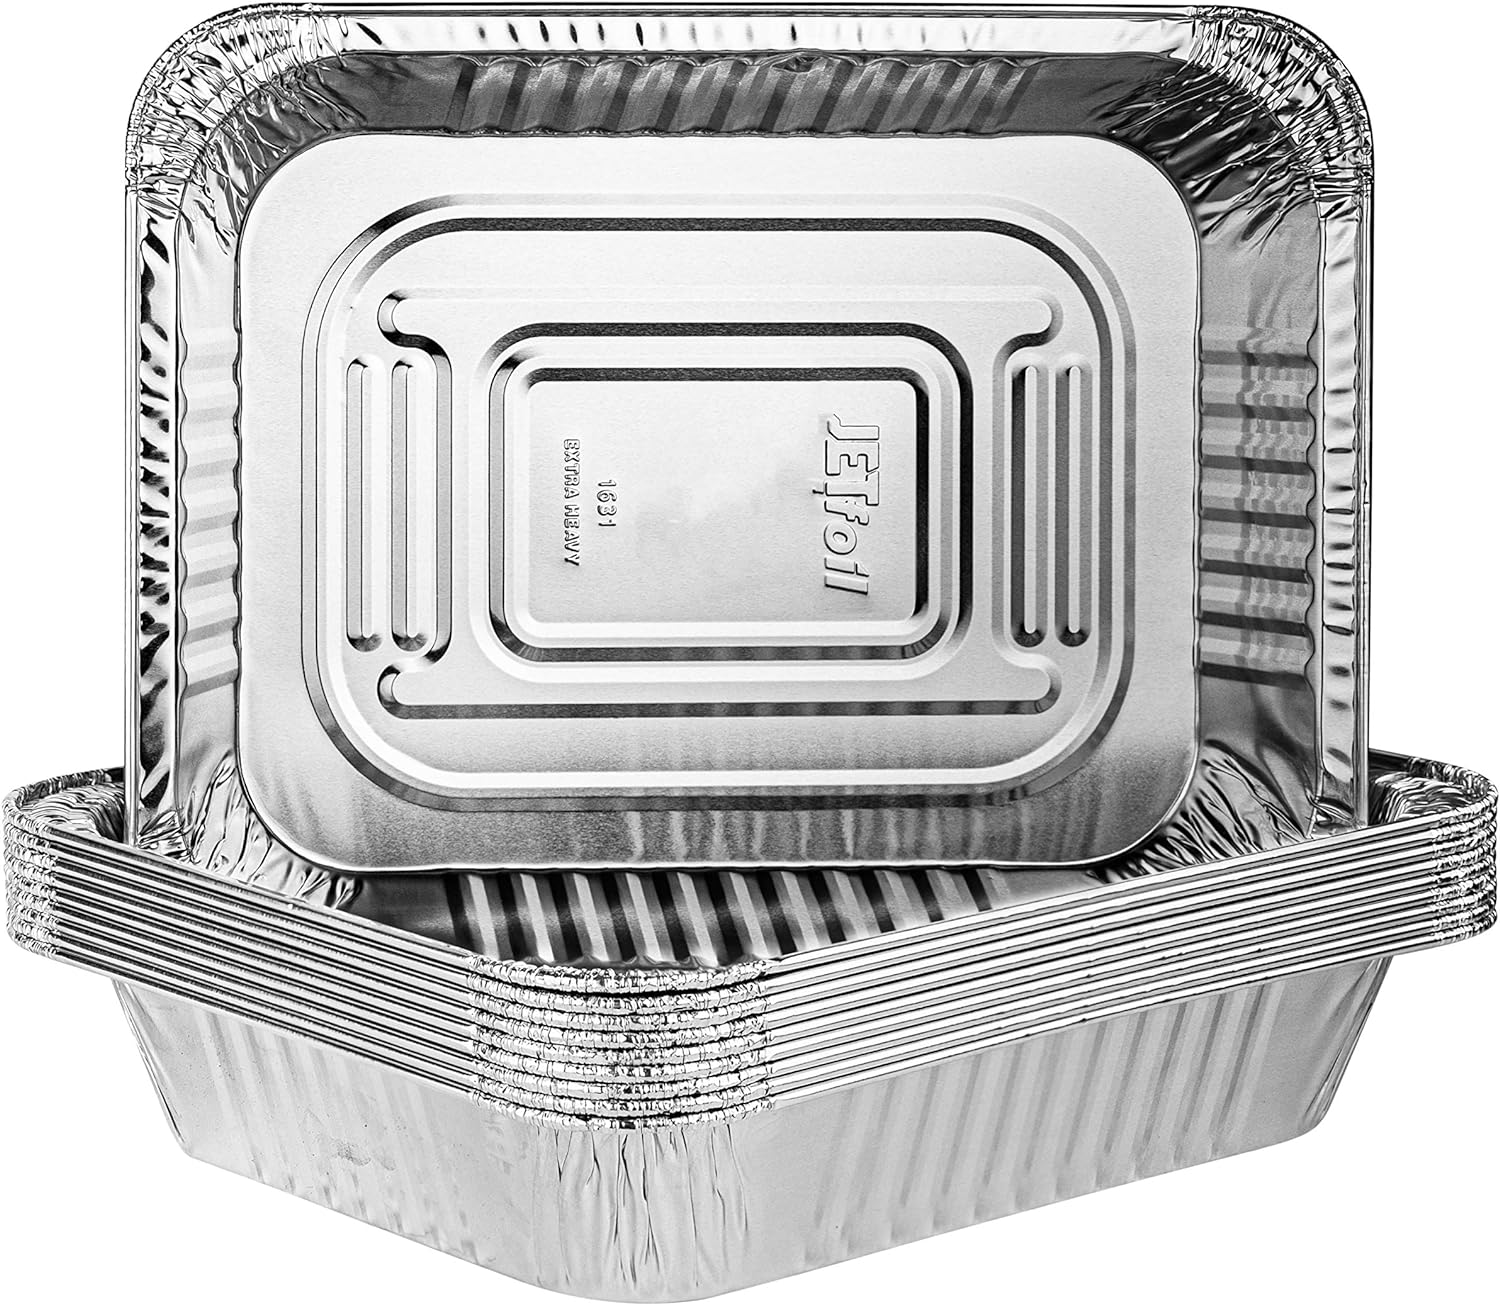 PLASTICPRO Disposable 9 x 13 Heavy Weight Aluminum Foil Pans Half Size Deep Steam Table Bakeware - Cookware Perfect for Baking Cakes, Bread, Meatloaf, Lasagna Pack of 10